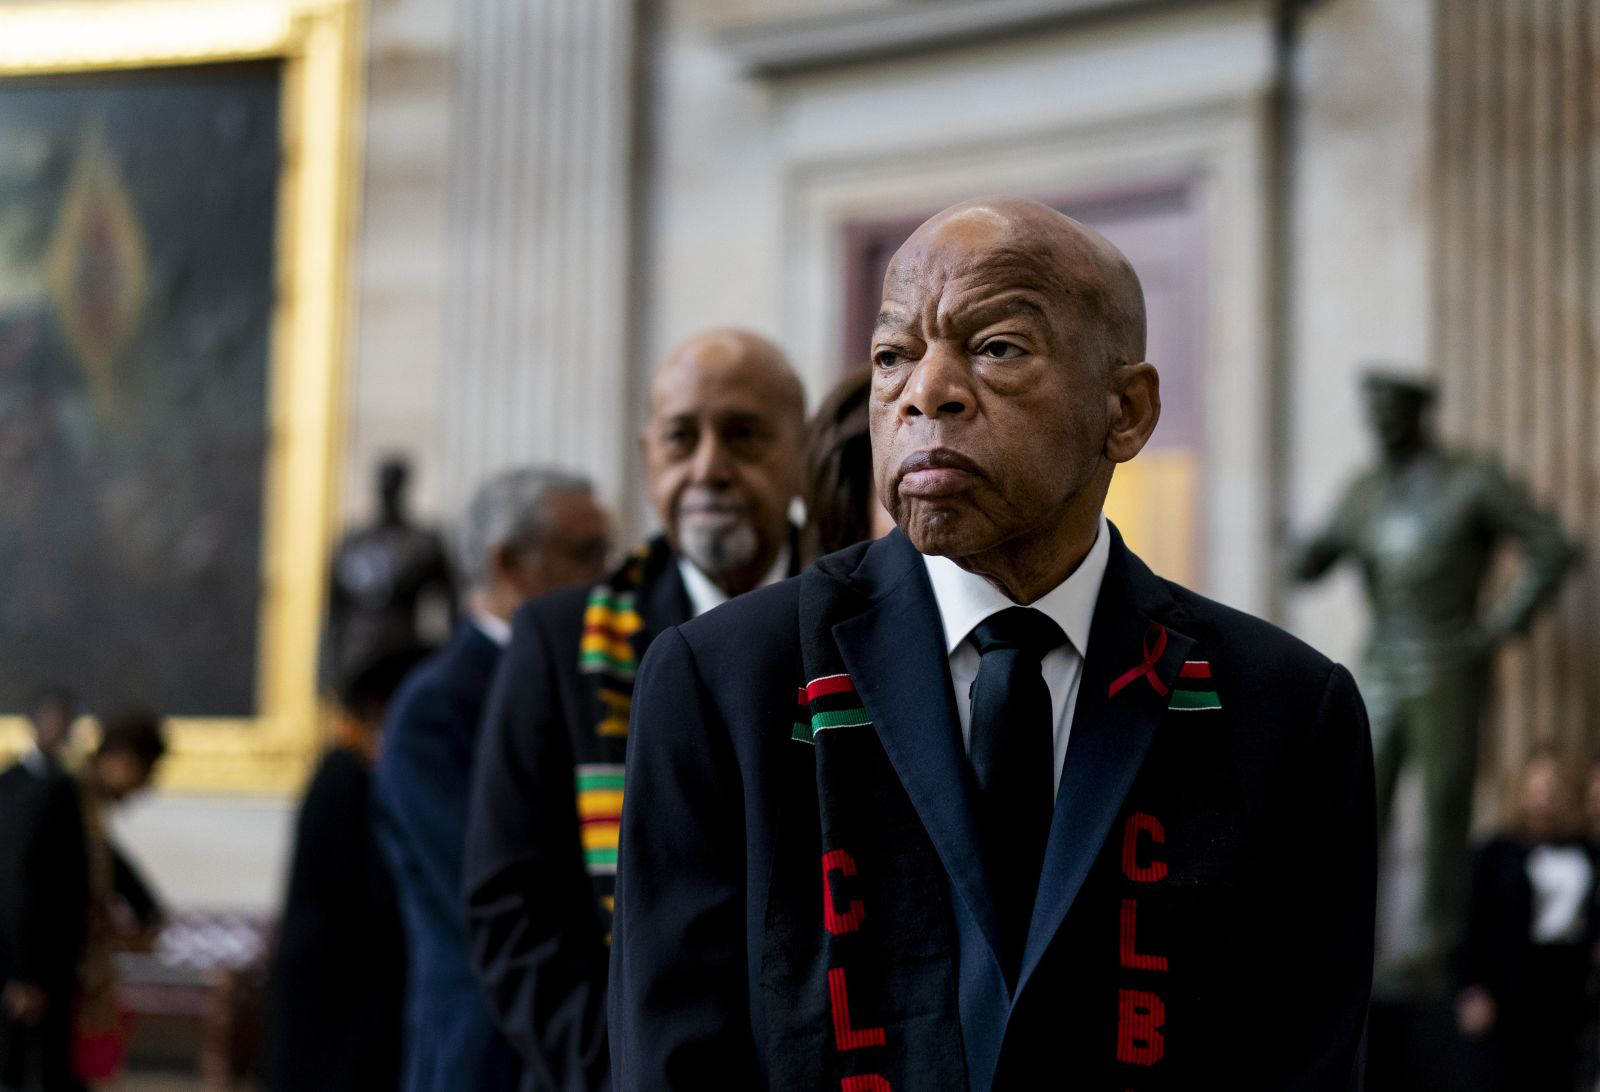 John Lewis prepares to pay his respects to US Rep. Elijah Cummings, who was lying in state in October 2019.